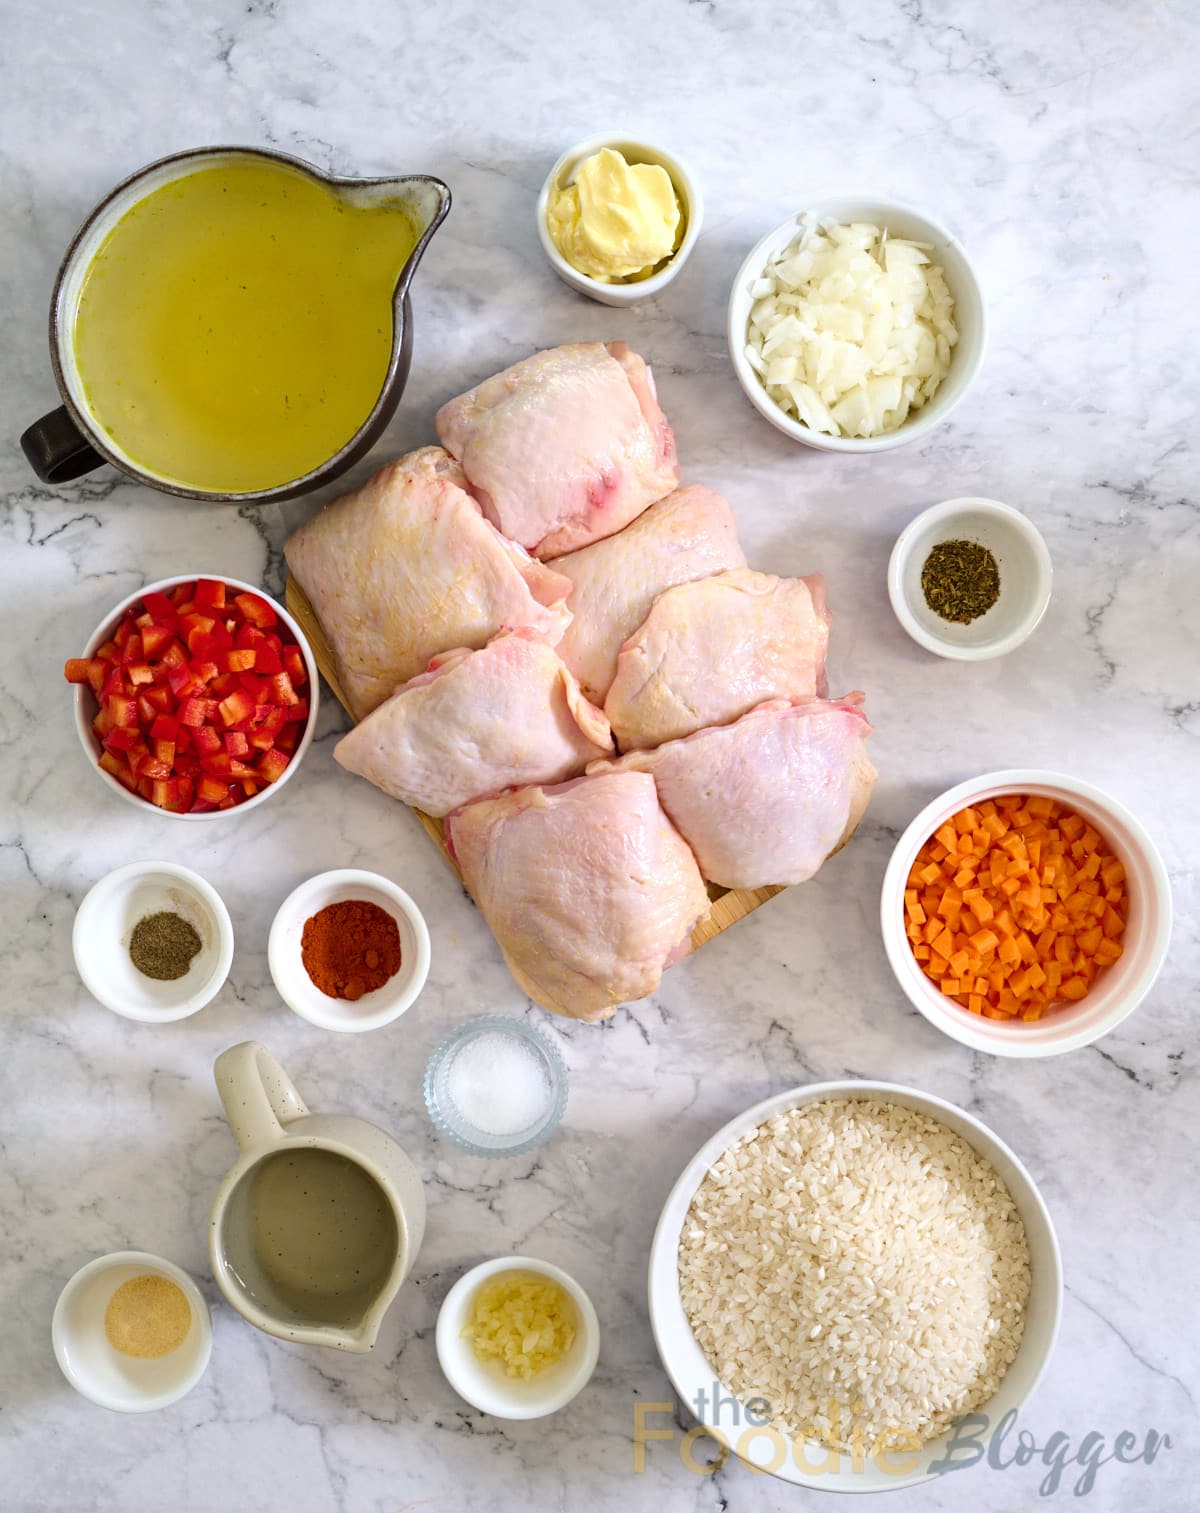 ingredients for baked chicken and rice thefoodieblogger